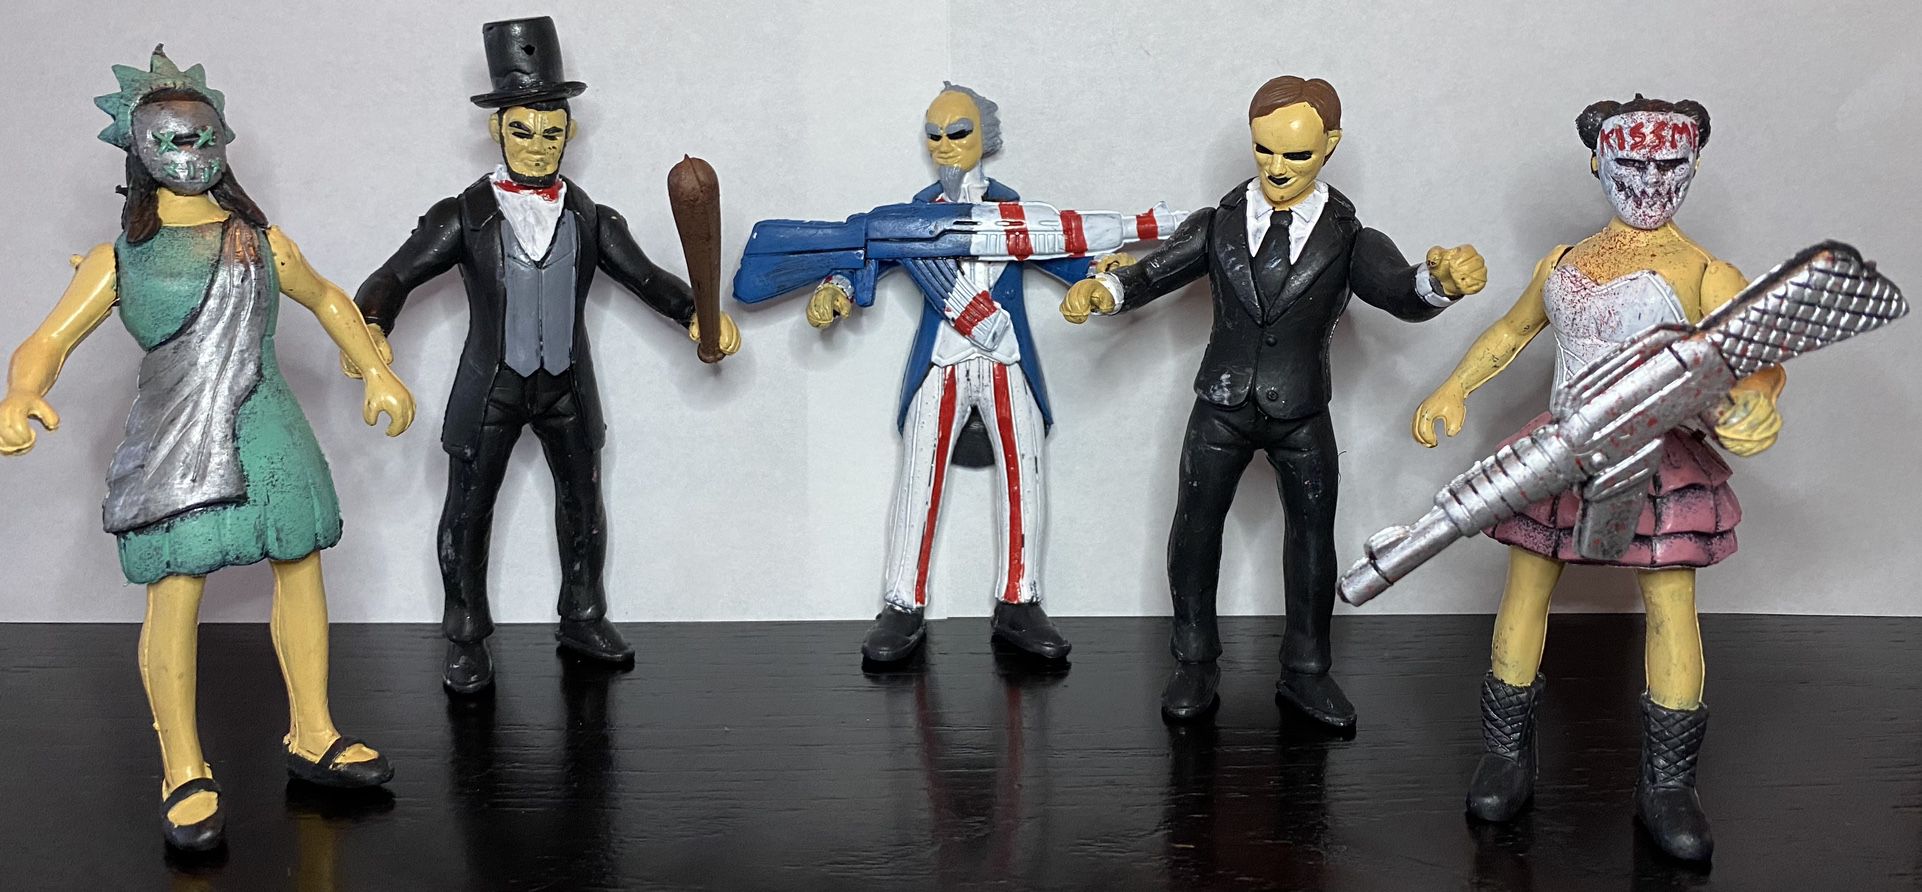 RARE The Purge Election Year Horror Action Figure Set Collectible Toys